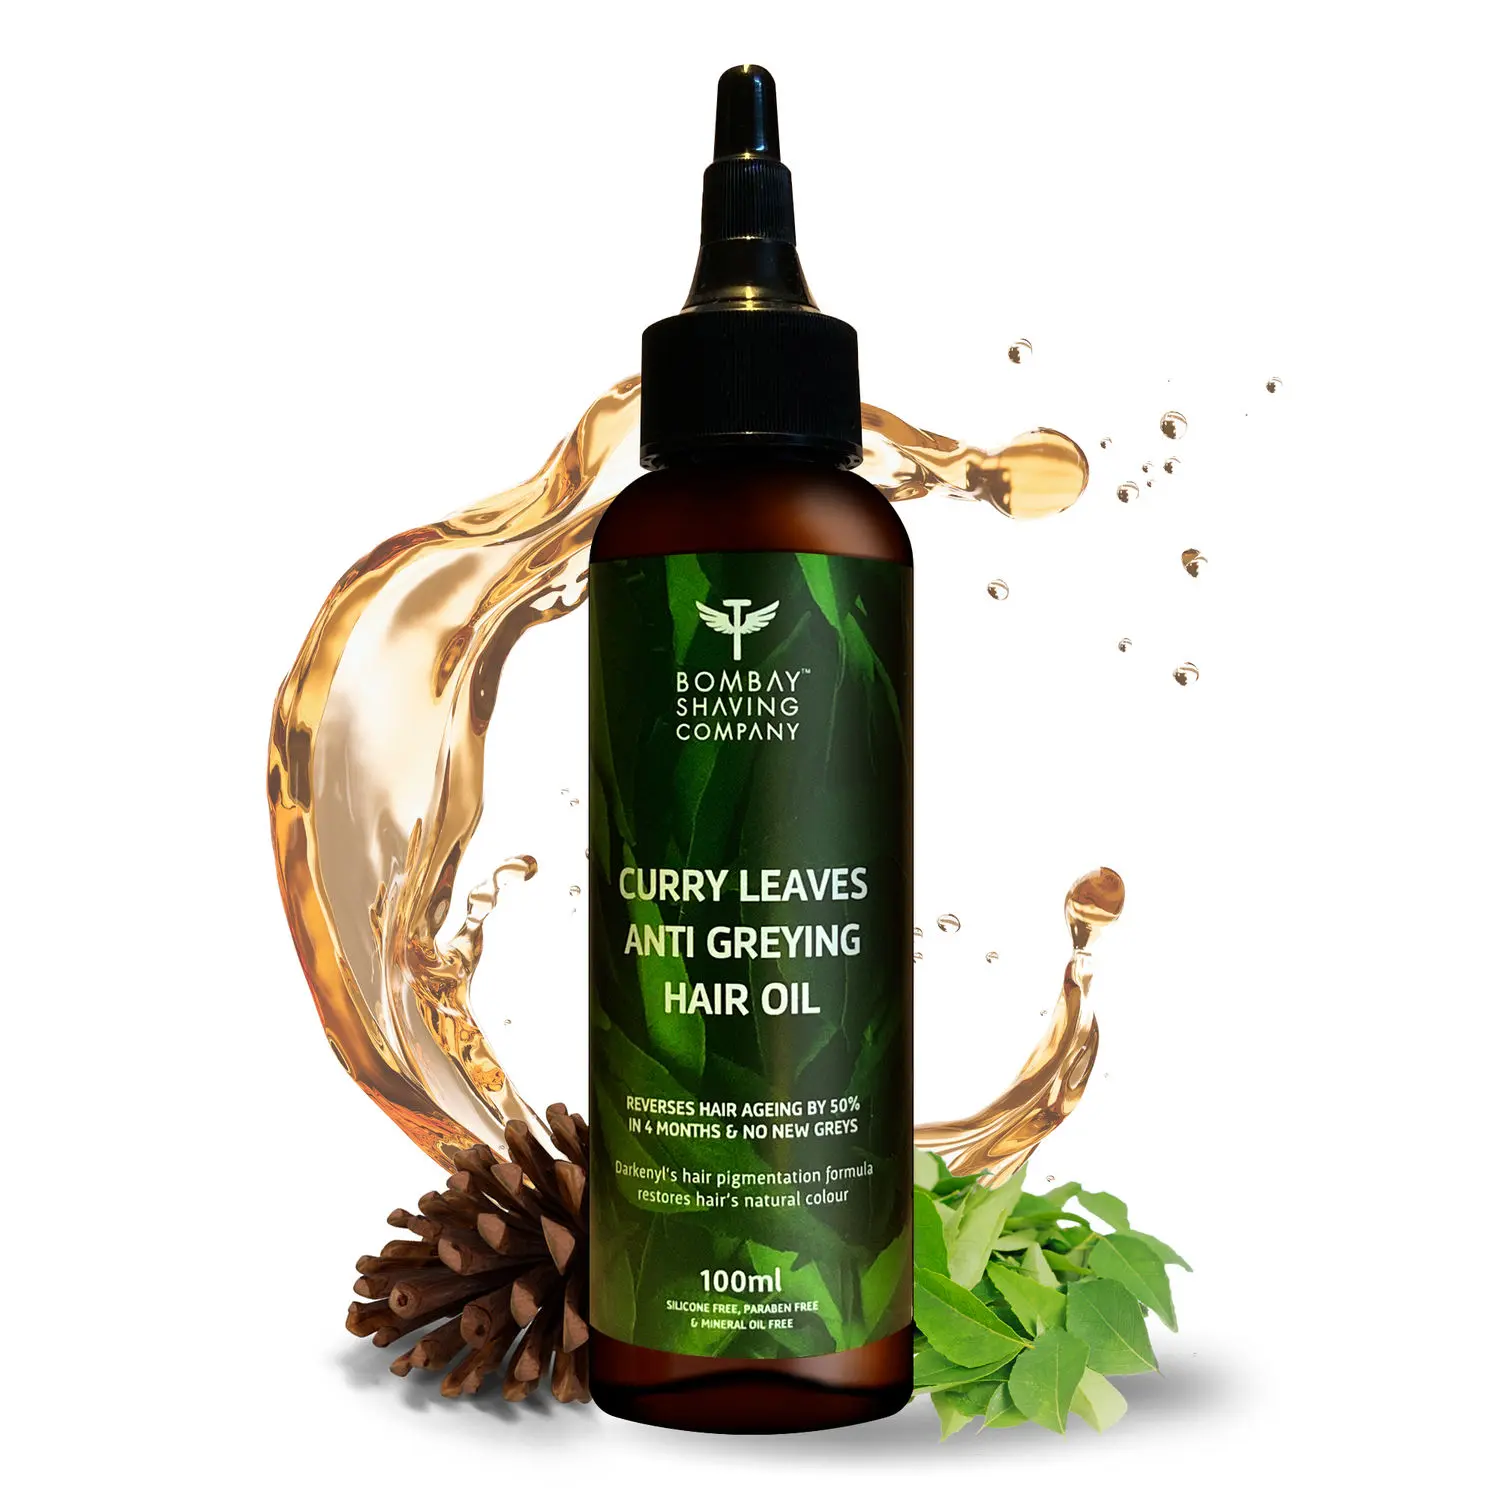 Bombay Shaving Company Anti Greying Hair Oil With Curry Leaves and Darkenyl (100 ml)